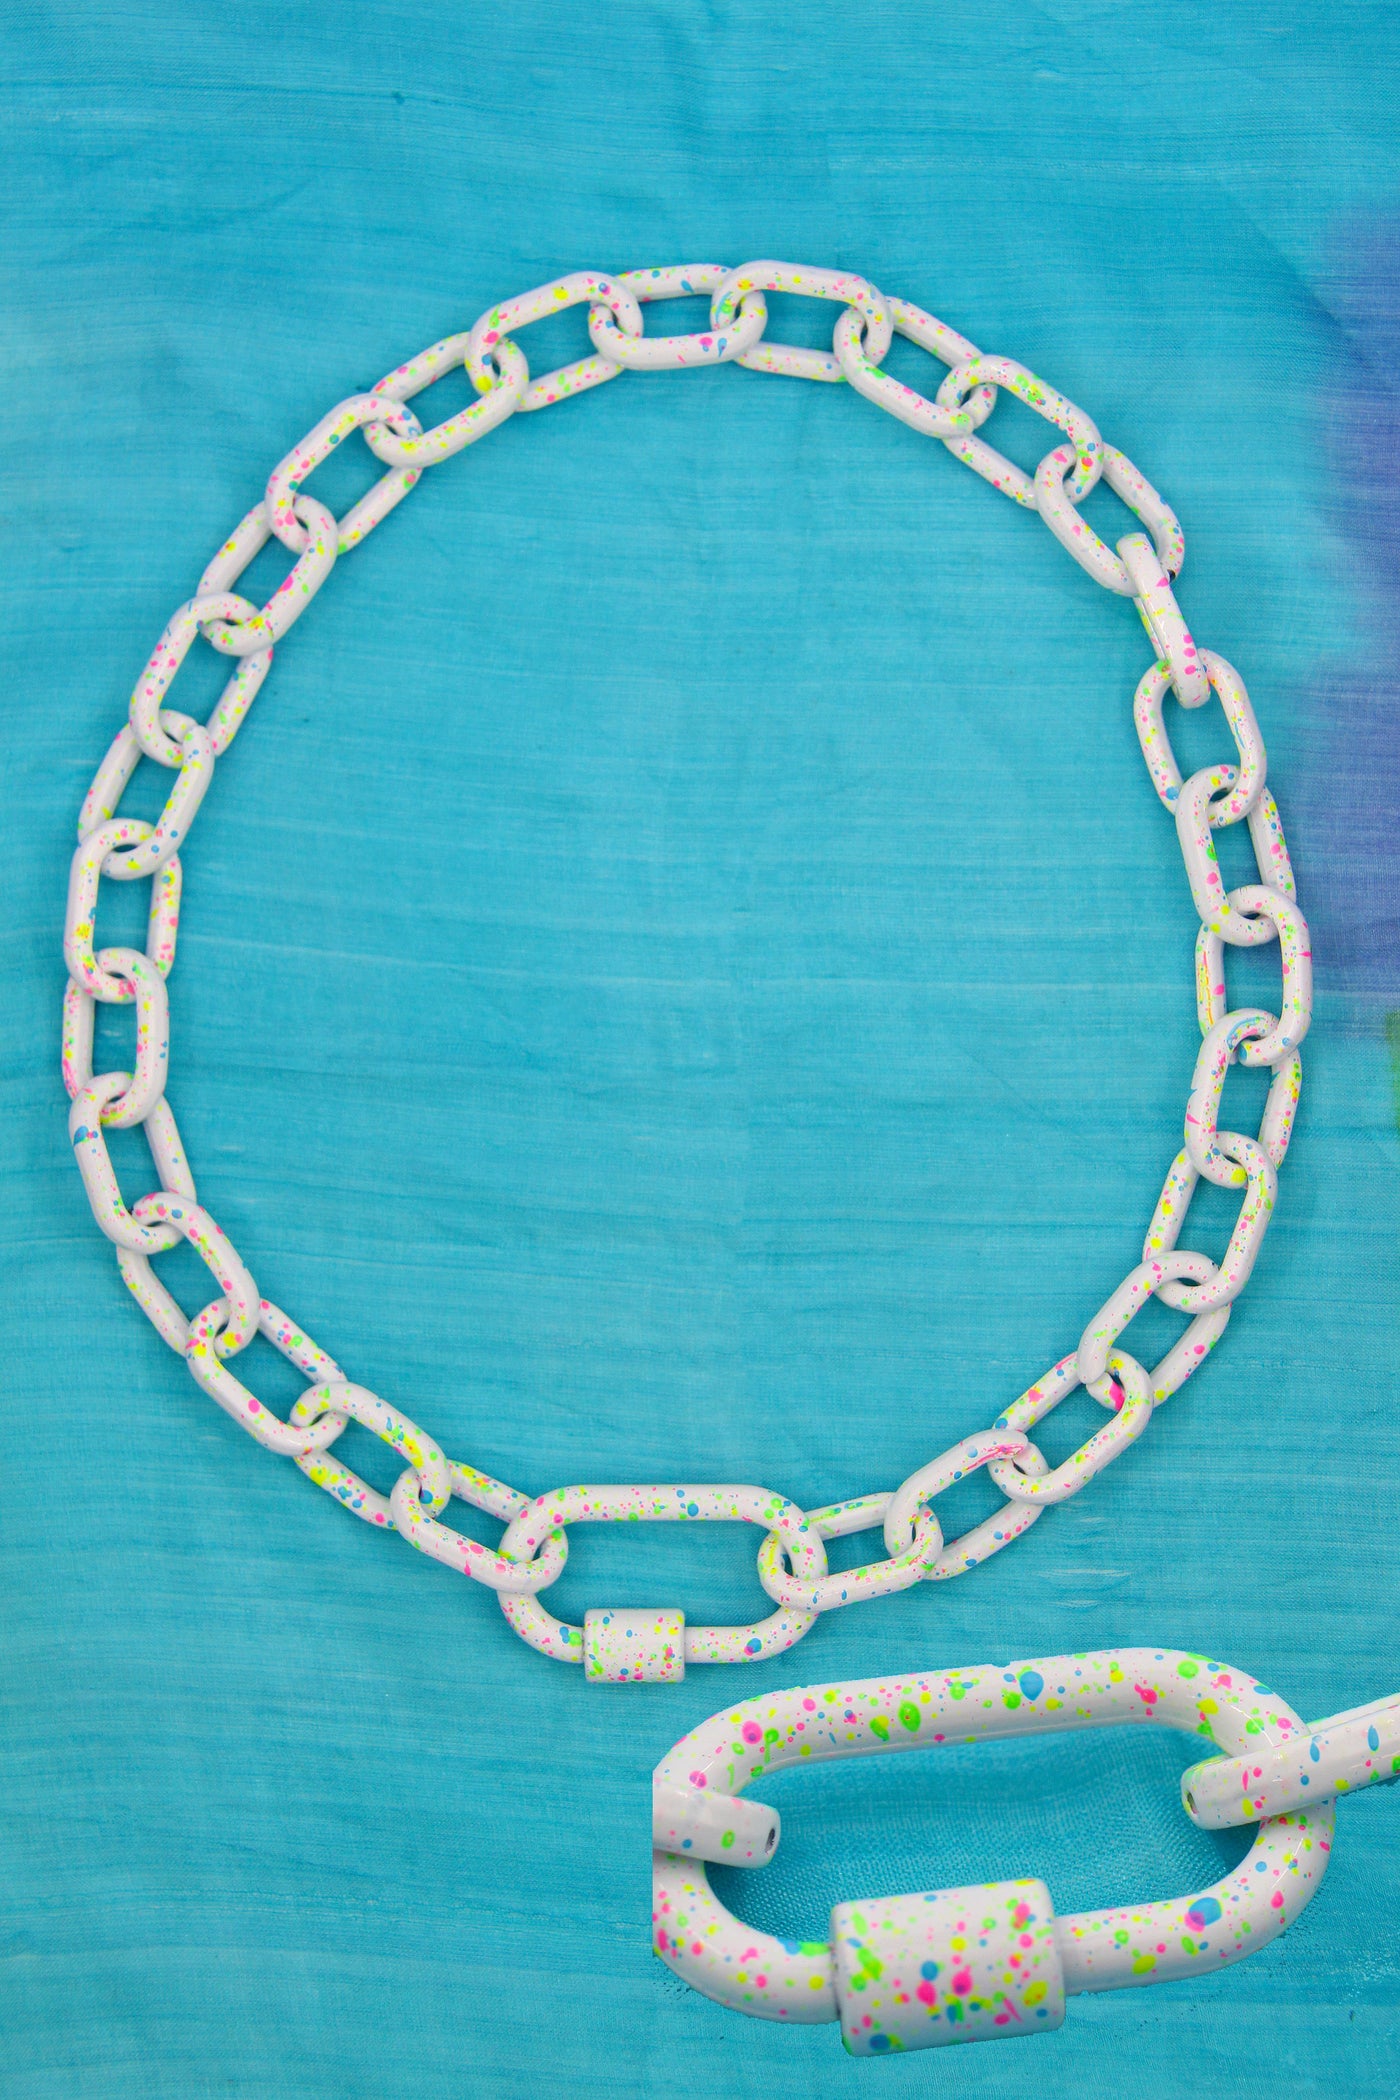 Luxe Link Enamel Chain Necklace, Assorted Colors